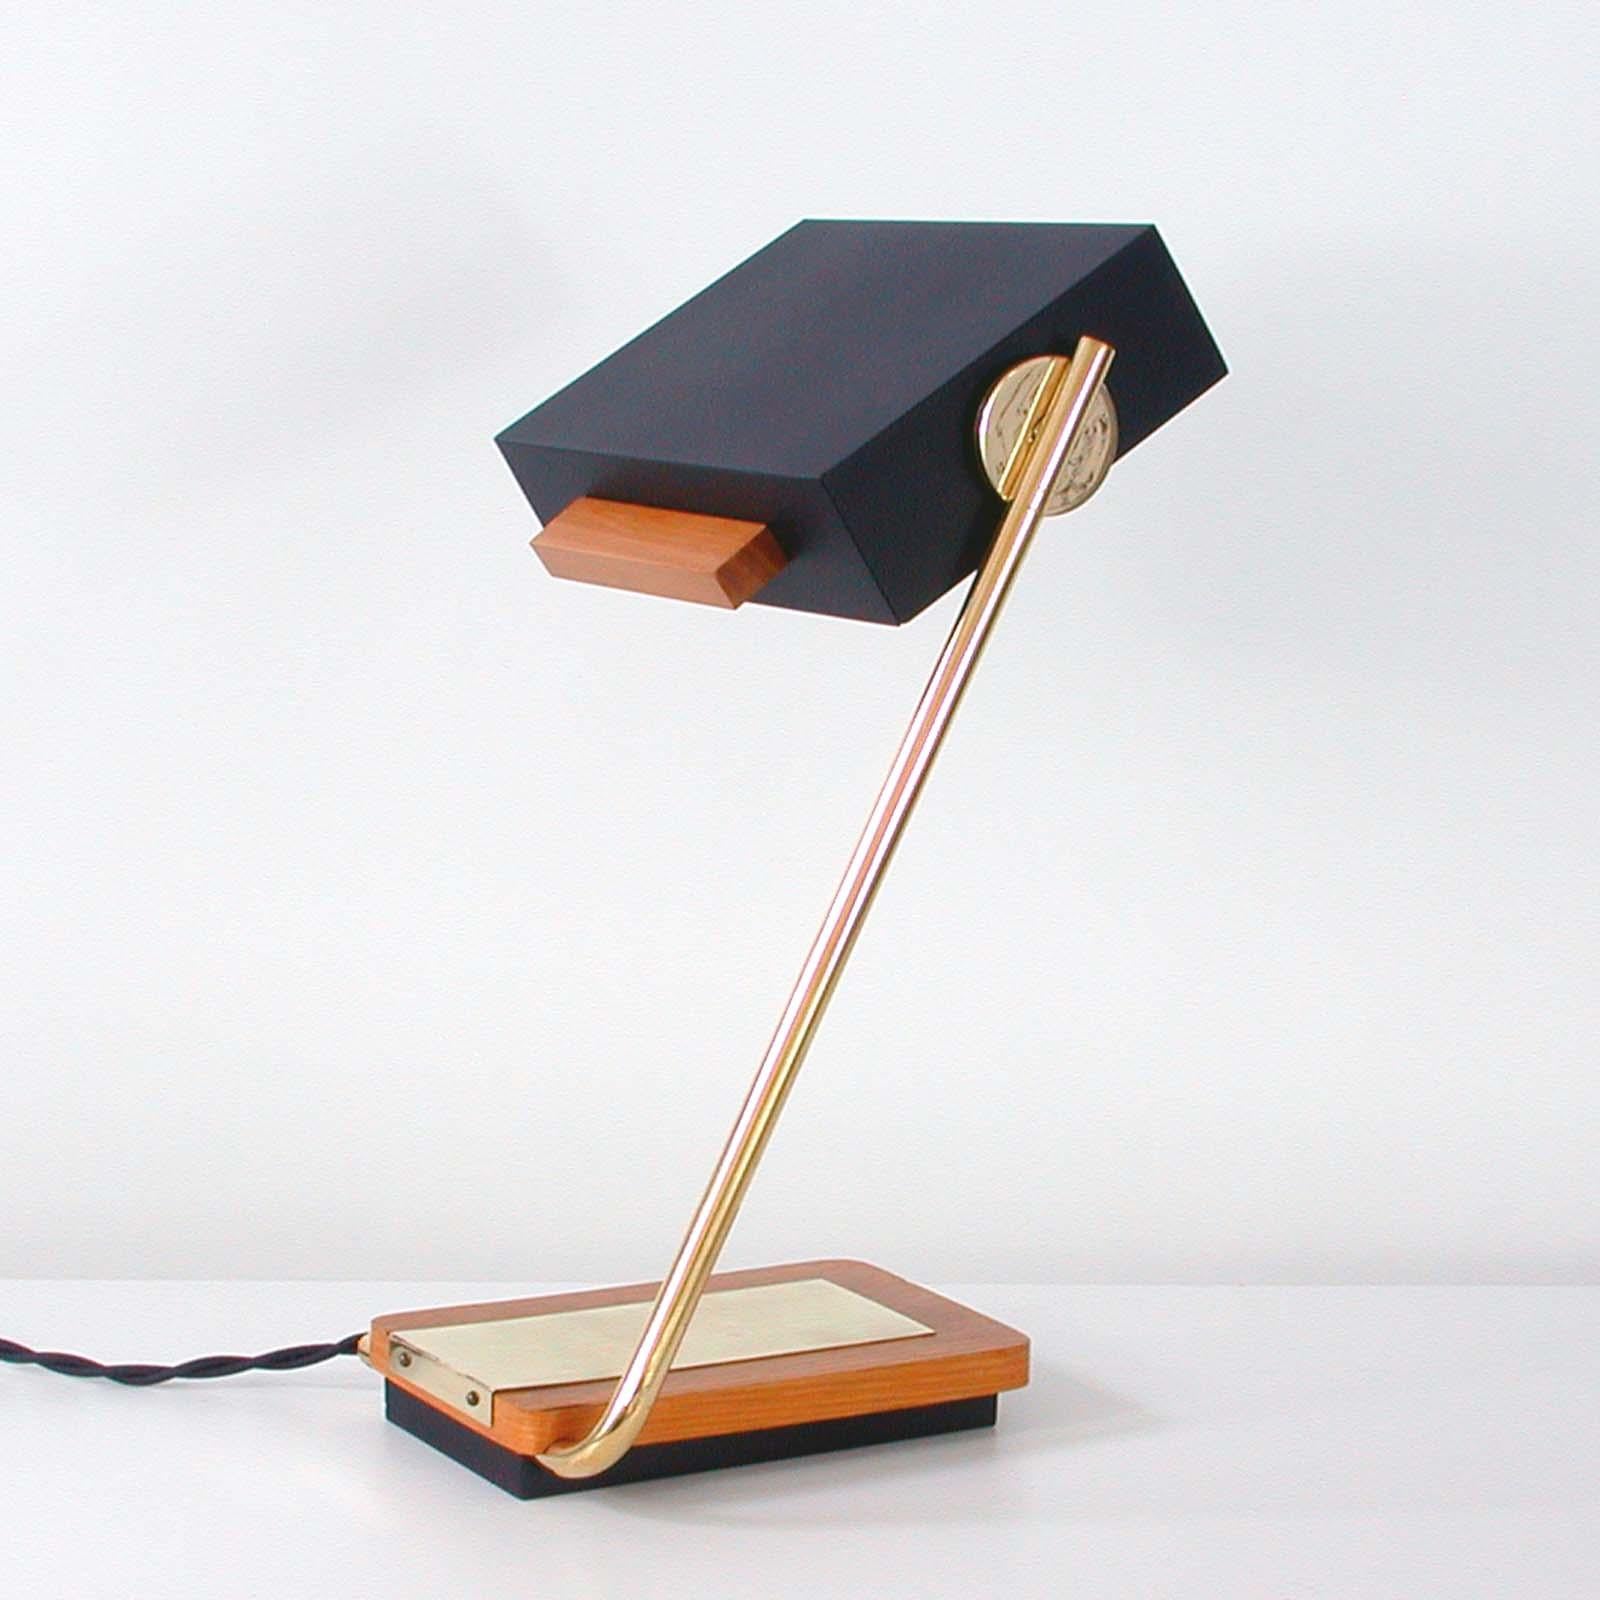 This modernist table or desk lamp was designed and manufactured in Germany in the 1960s by Kaiser Leuchten. It has got a teak base, a brass adjustable lamp arm and a black rectangular shade with an off white interior.

It requires one E14 bulb.